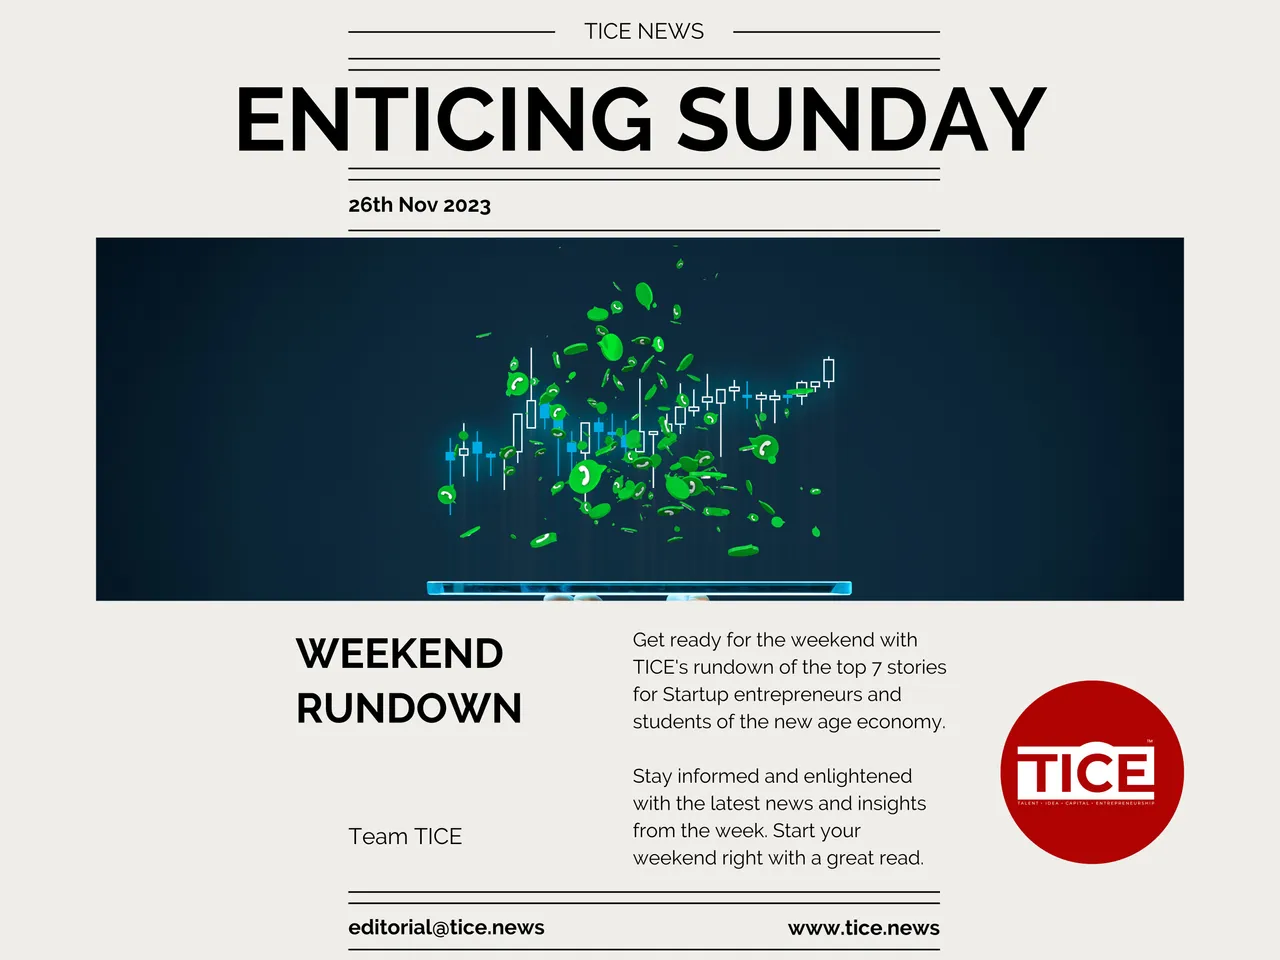 Enticing Sunday: Year-End Layoffs Again, BYJU's Controversy Continues!